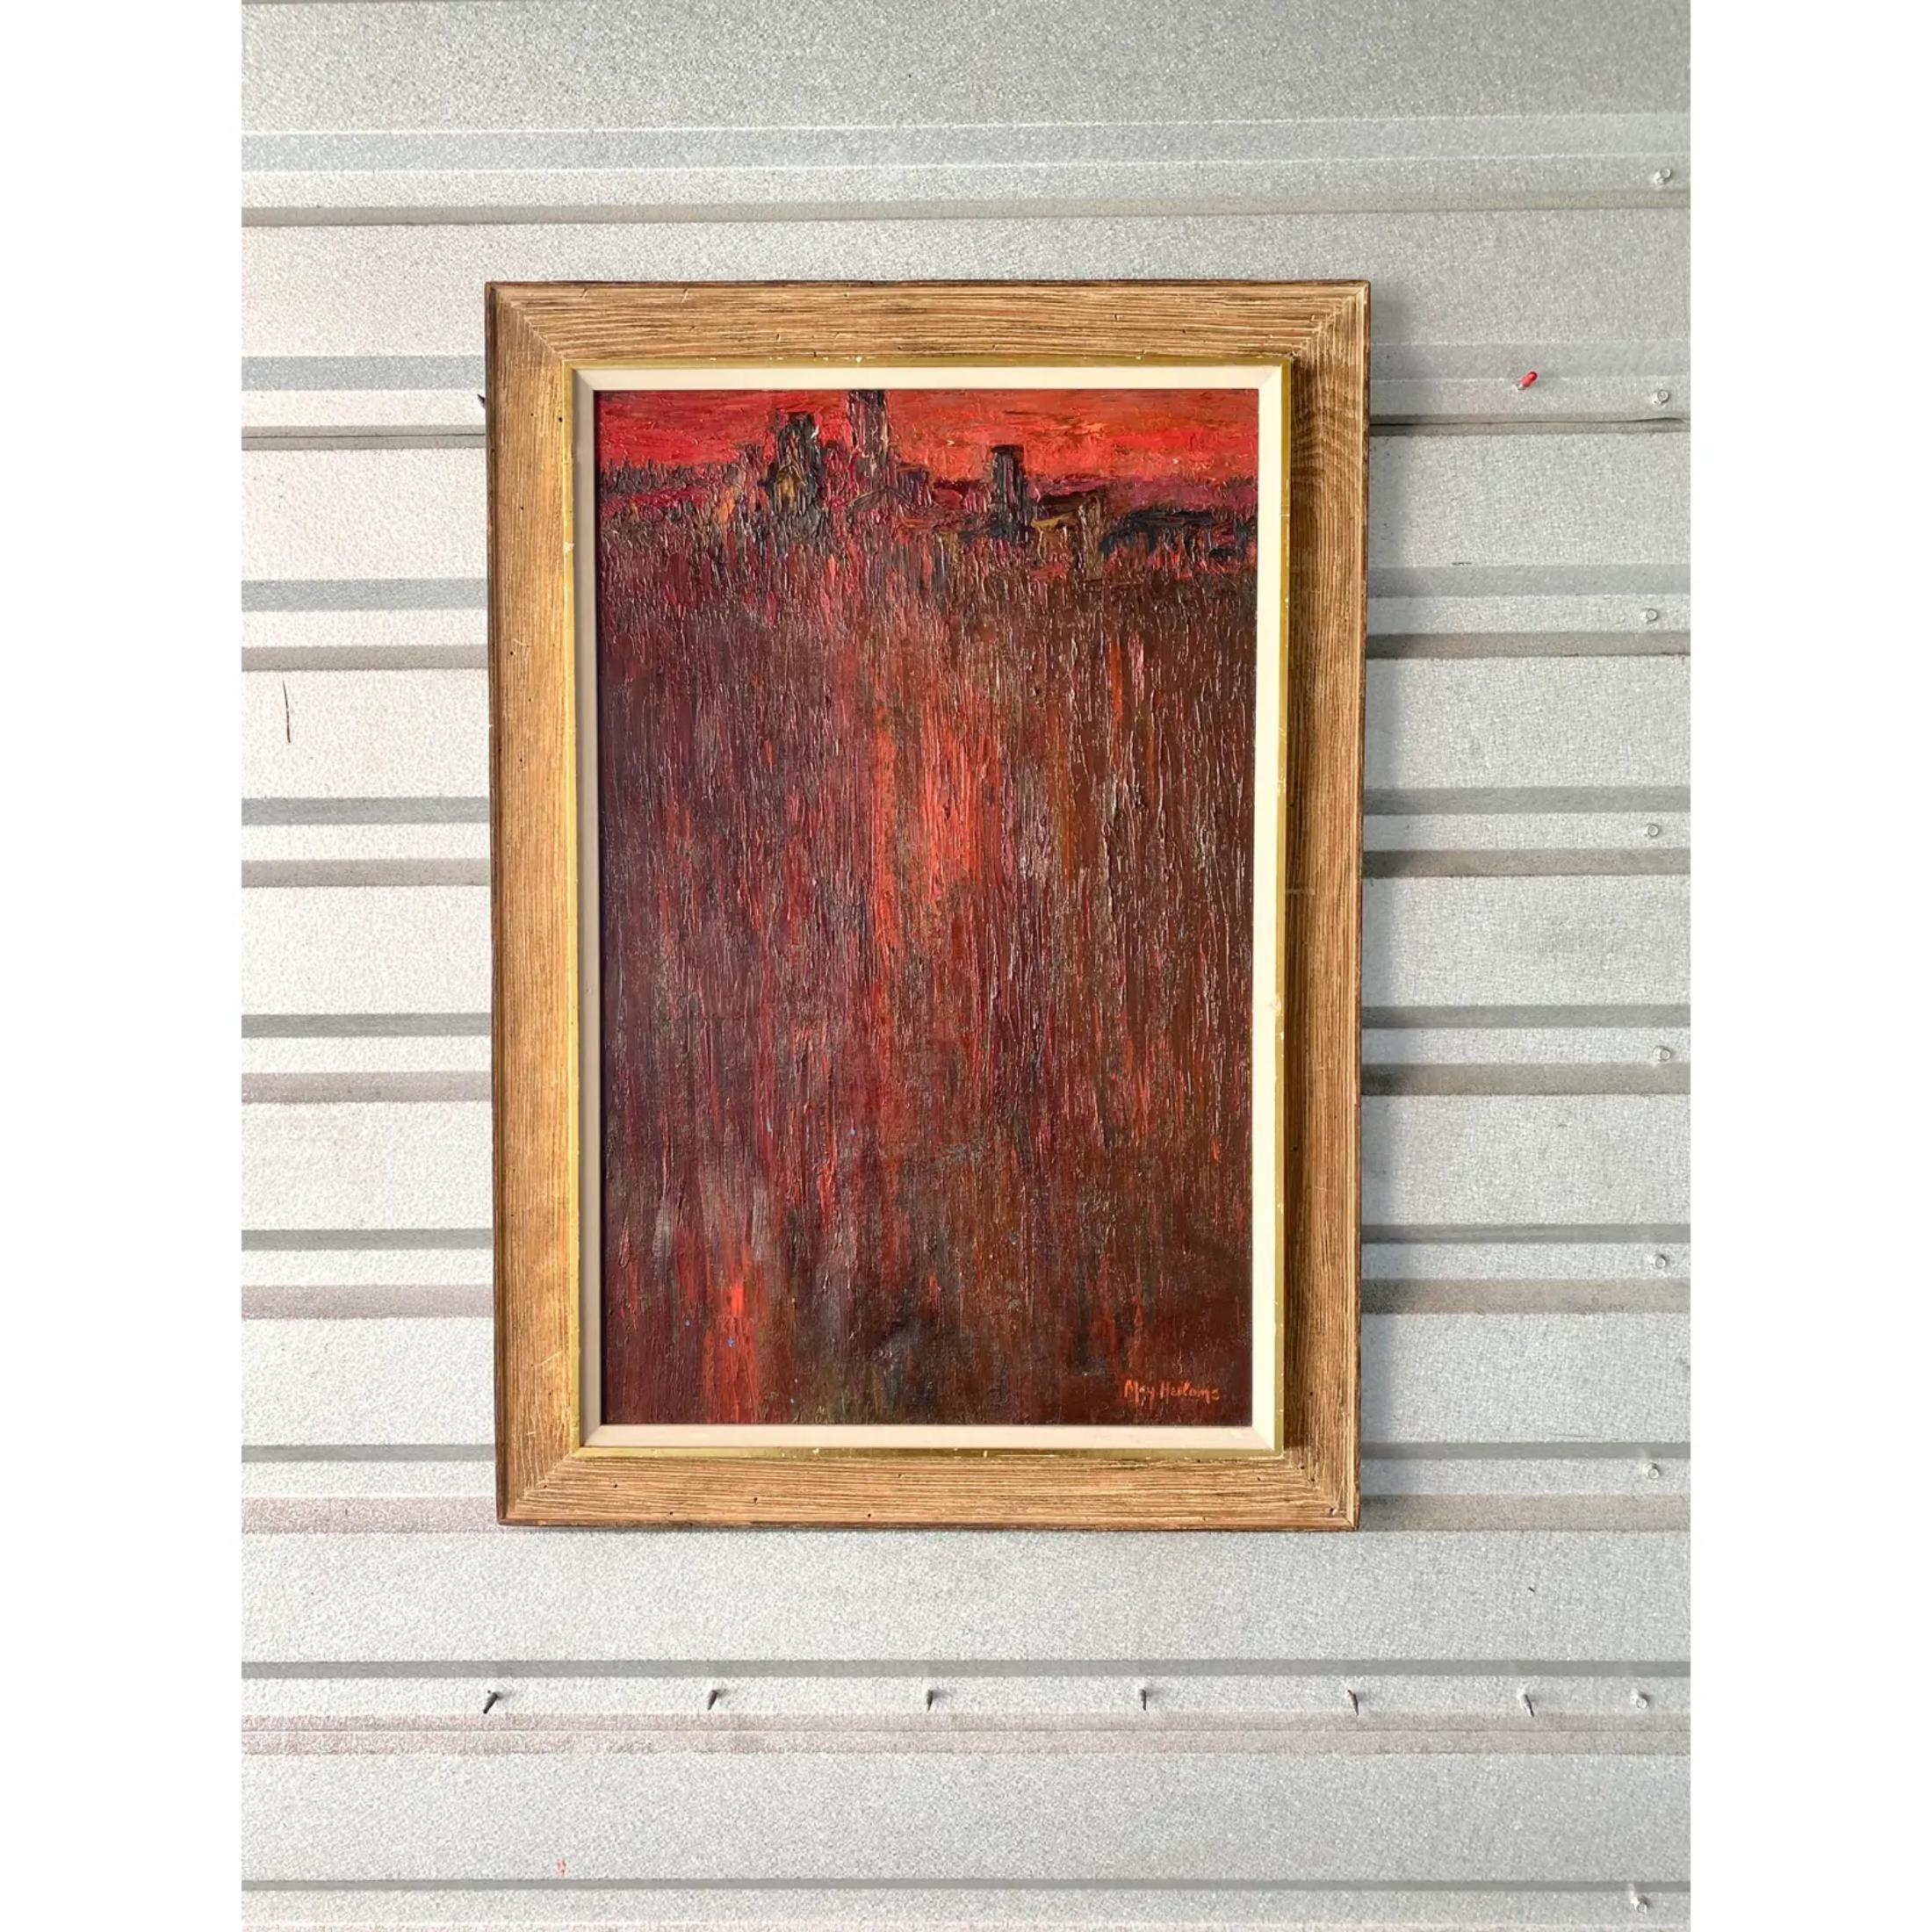 American Midcentury Abstract Original Oil Painting Signed May Heiloms For Sale